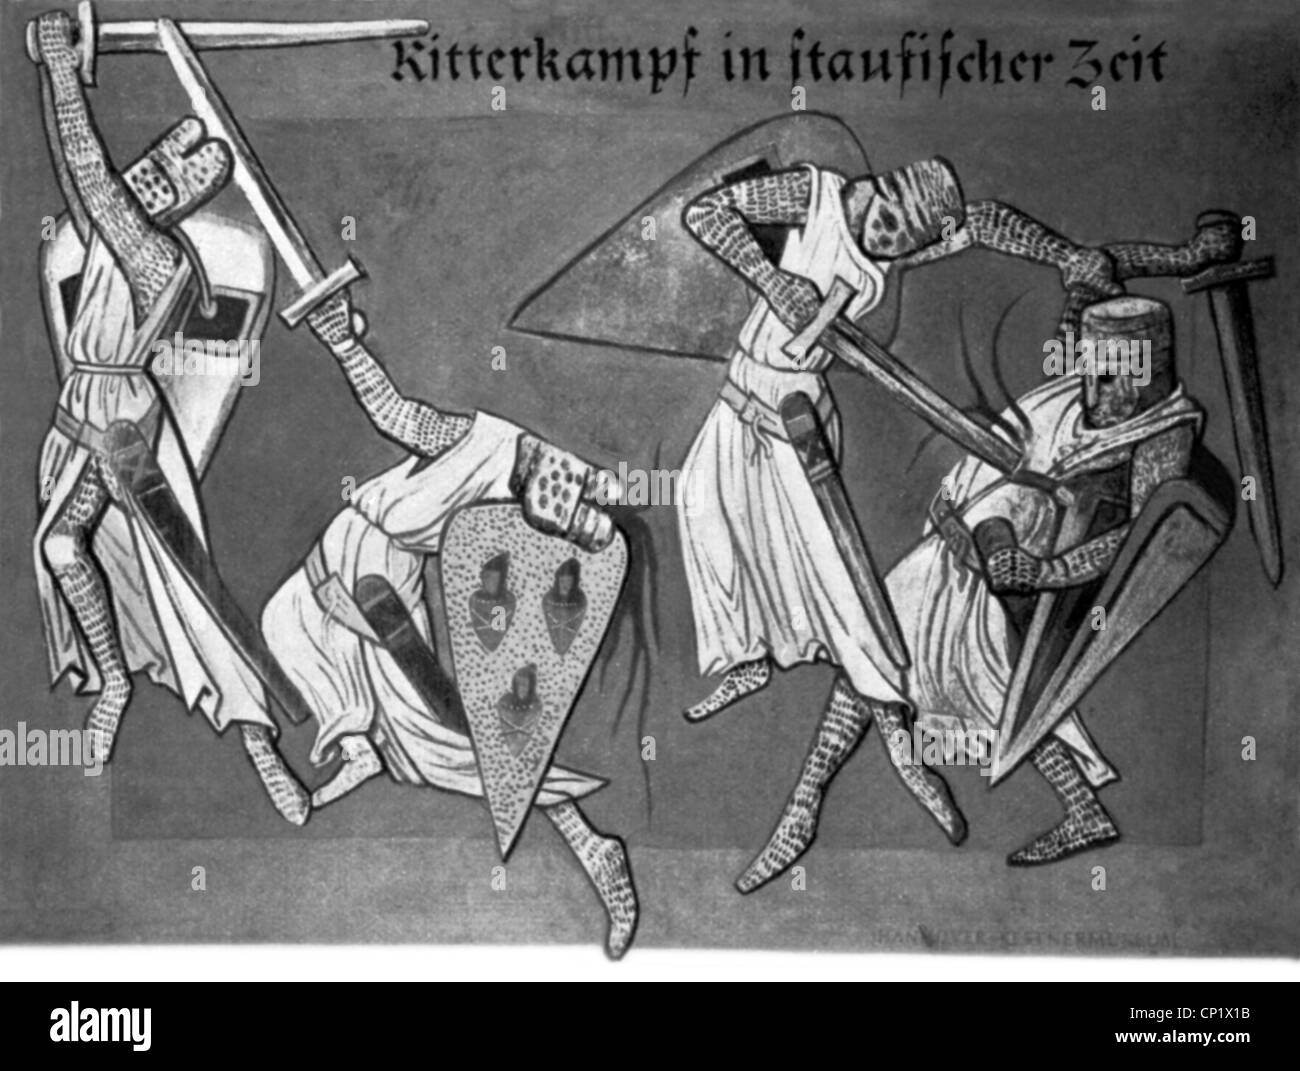 Middle Ages, knights, fighting knights at the time of the Hohenstaufen dynasty, 12th / 13th century, illustration, fights, battling, battle, fighting, fight, violence, killing, sword, swords, shield, shields, encounter, encounters, historic, historical, medieval, people, Additional-Rights-Clearences-Not Available Stock Photo